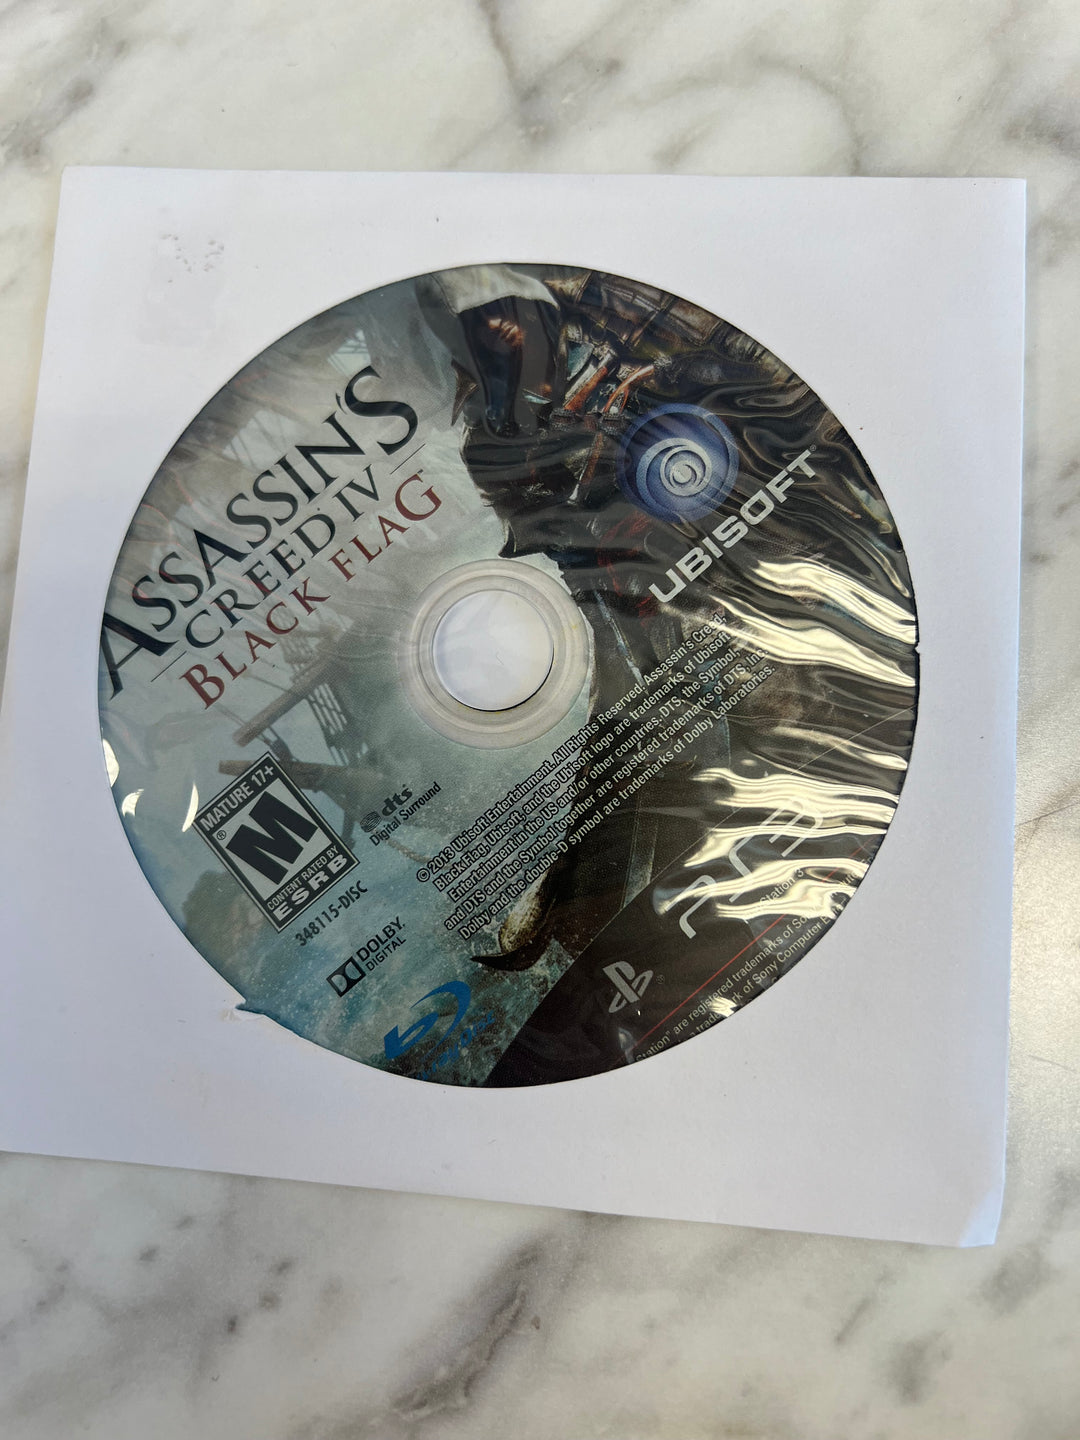 Assassin's Creed IV Black Flag for PS3 Playstation 3 Disc Only No Case/Manual DU62724